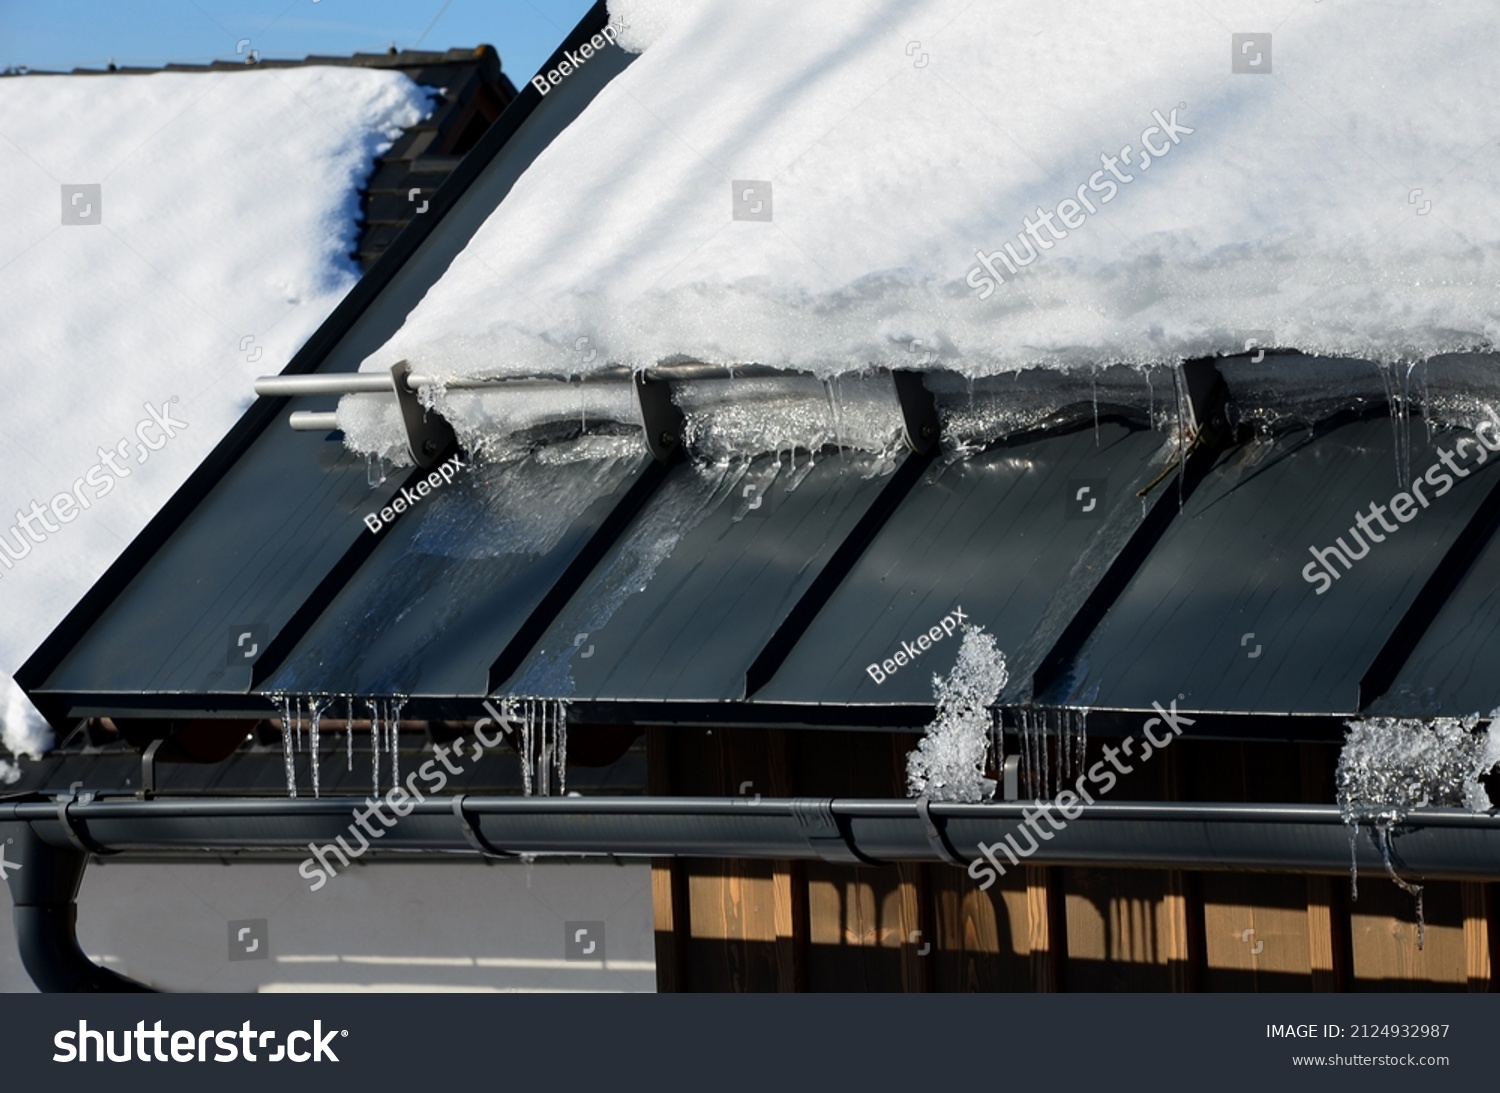 galvanized metal roof in the mountains with a bar against the rapid sliding of snow. If snow and ice quickly fall on people under the roof, they will be injured or dead. slows down the avalanche #2124932987